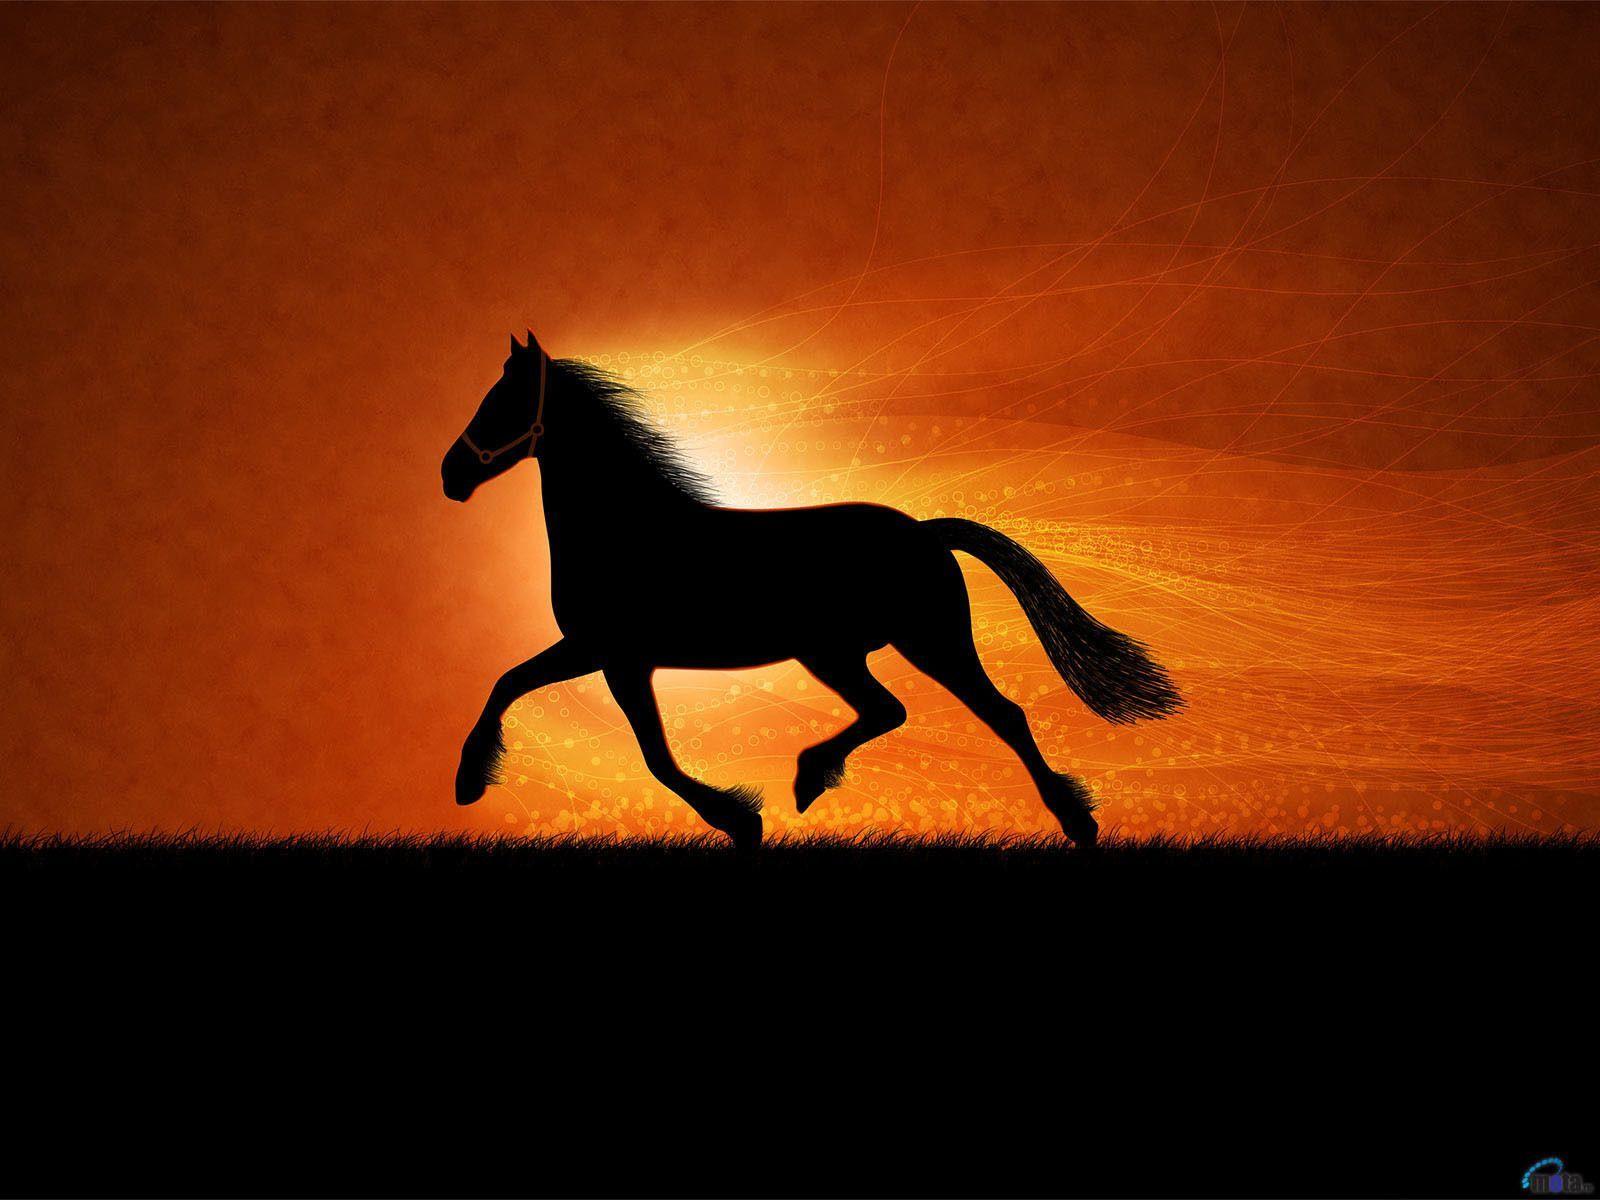 Freedom. Horse wallpaper, Horse silhouette, Horse background